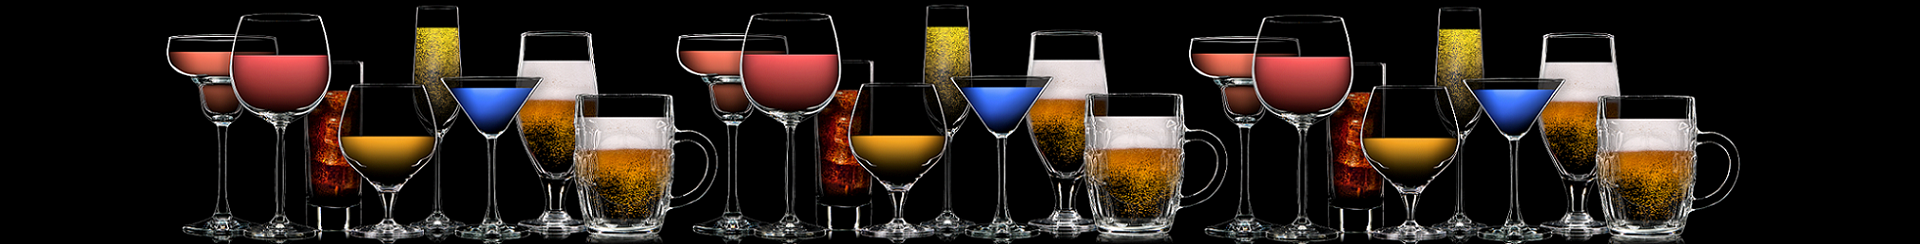 Alcohol Beverage Licensing Options-Alternatives to the Quota License